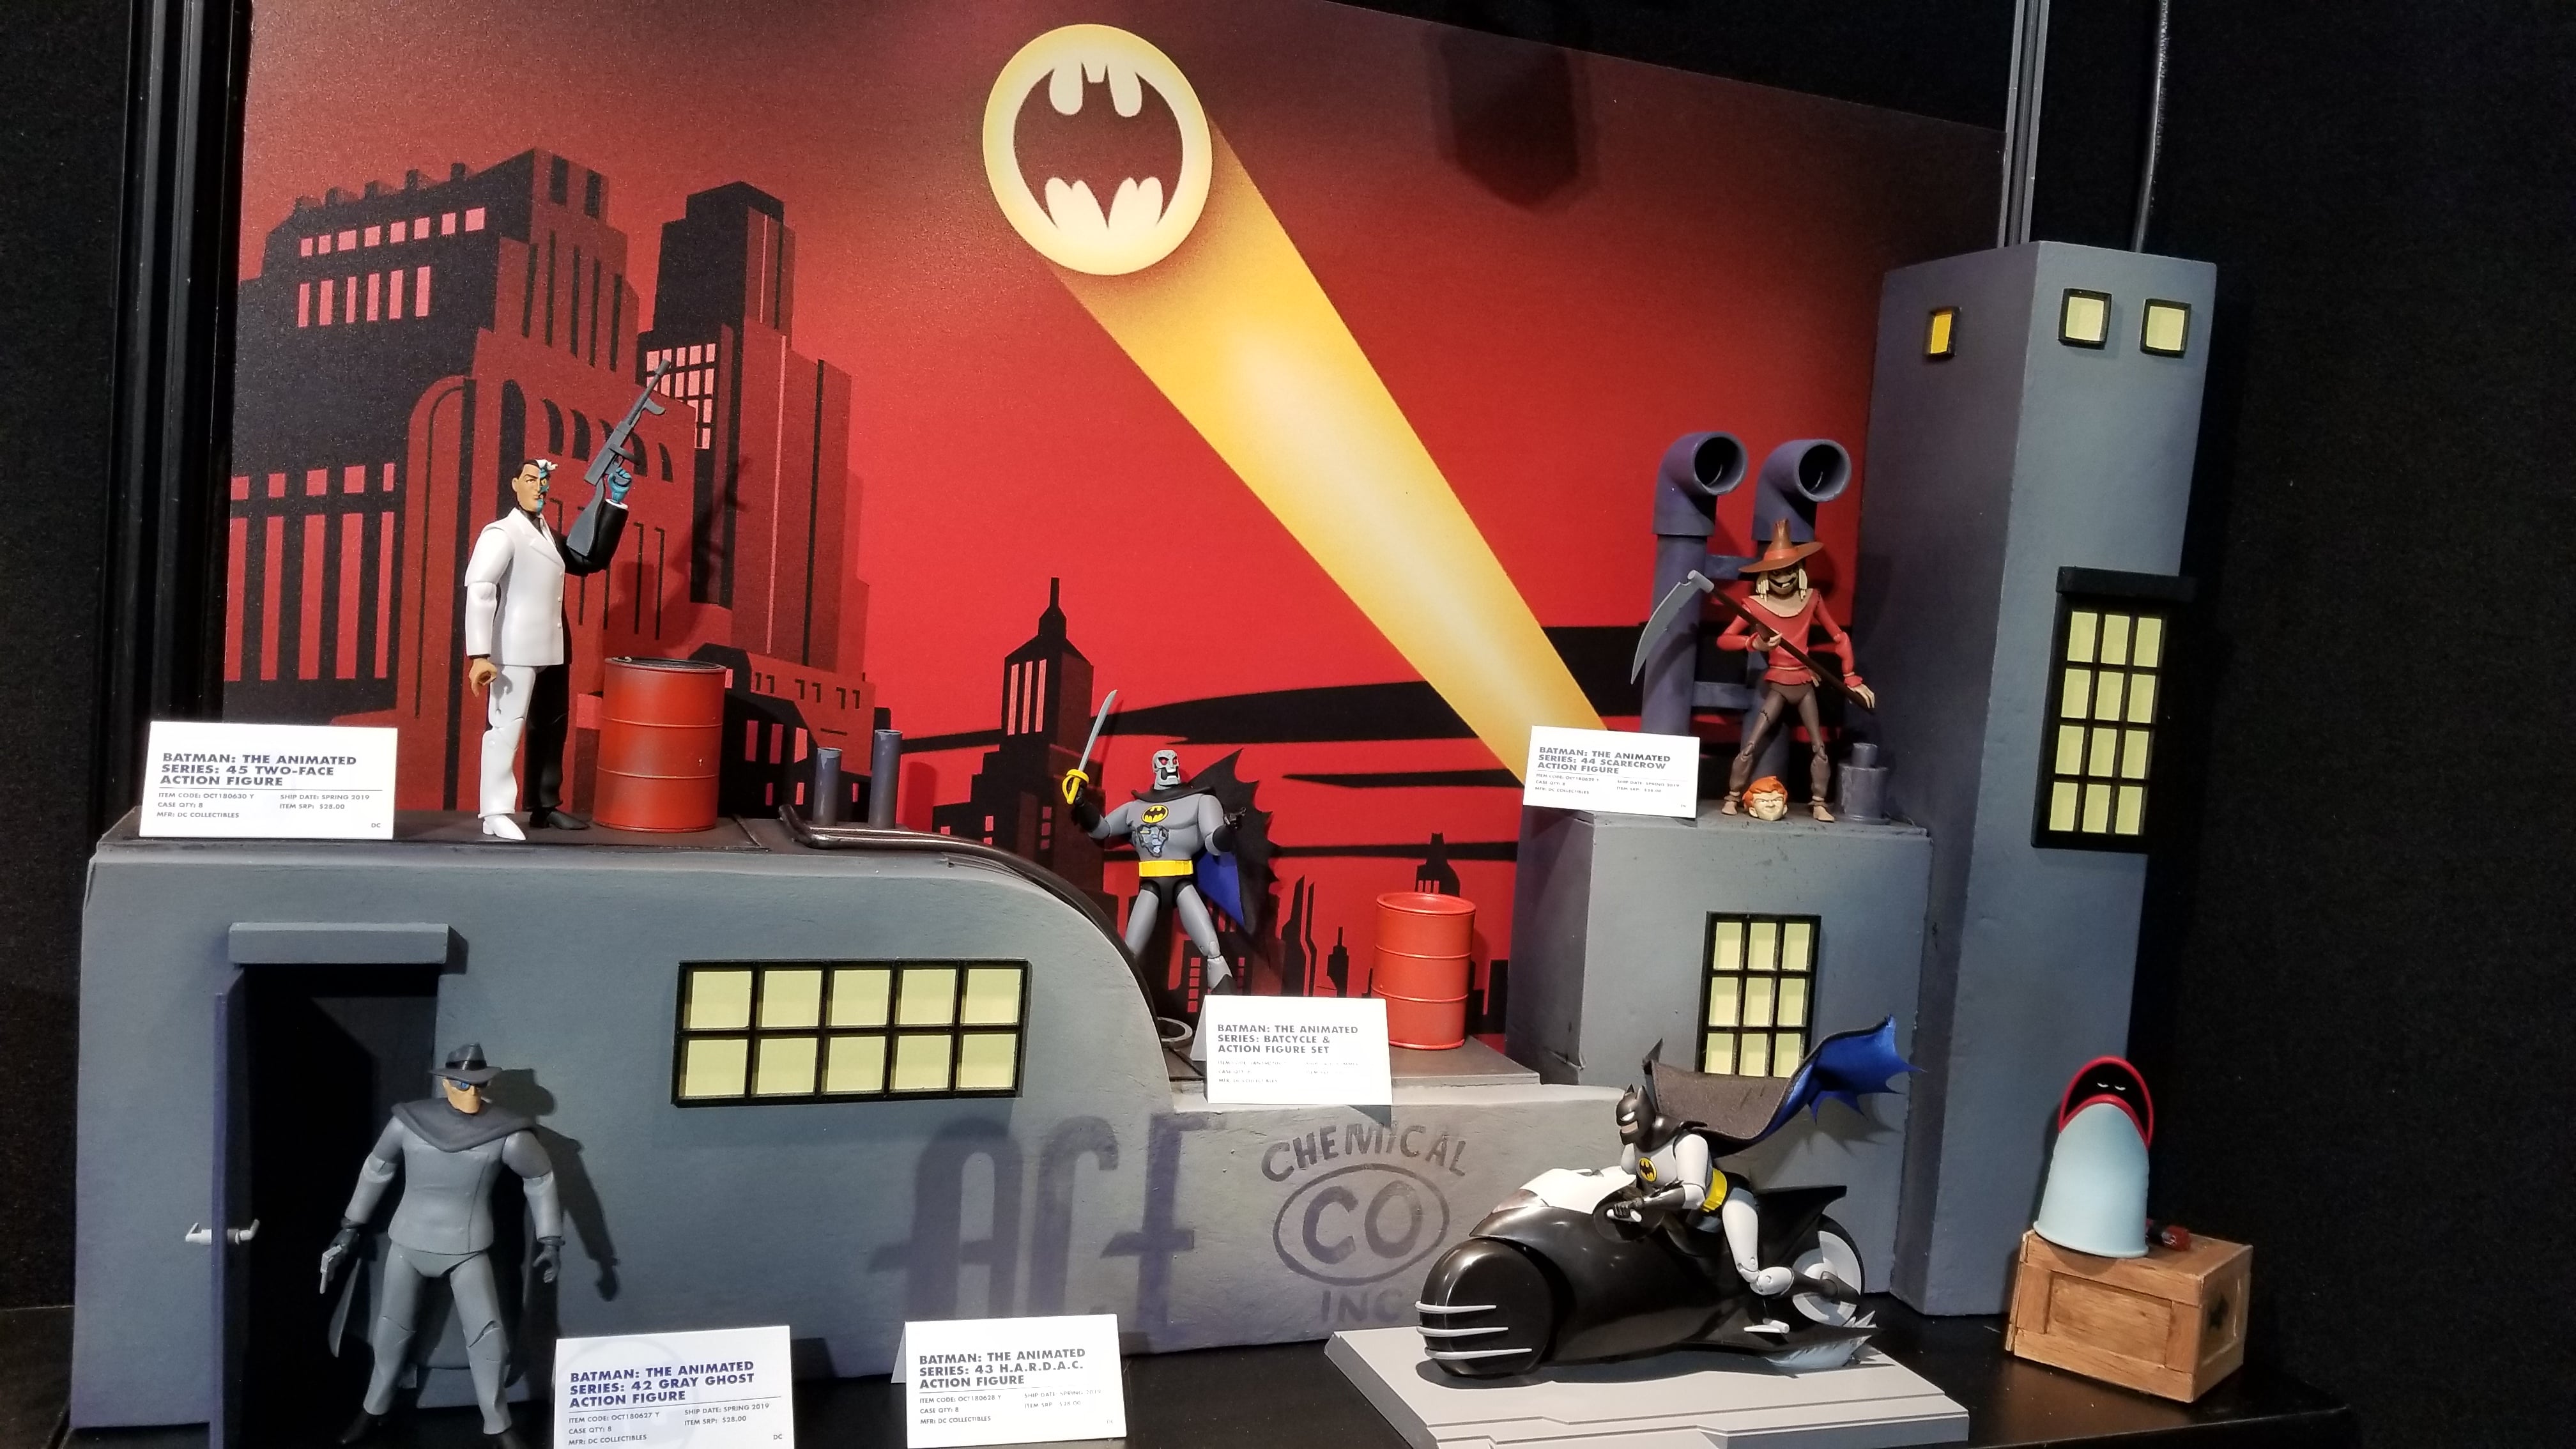 batman the animated series action figures 2019